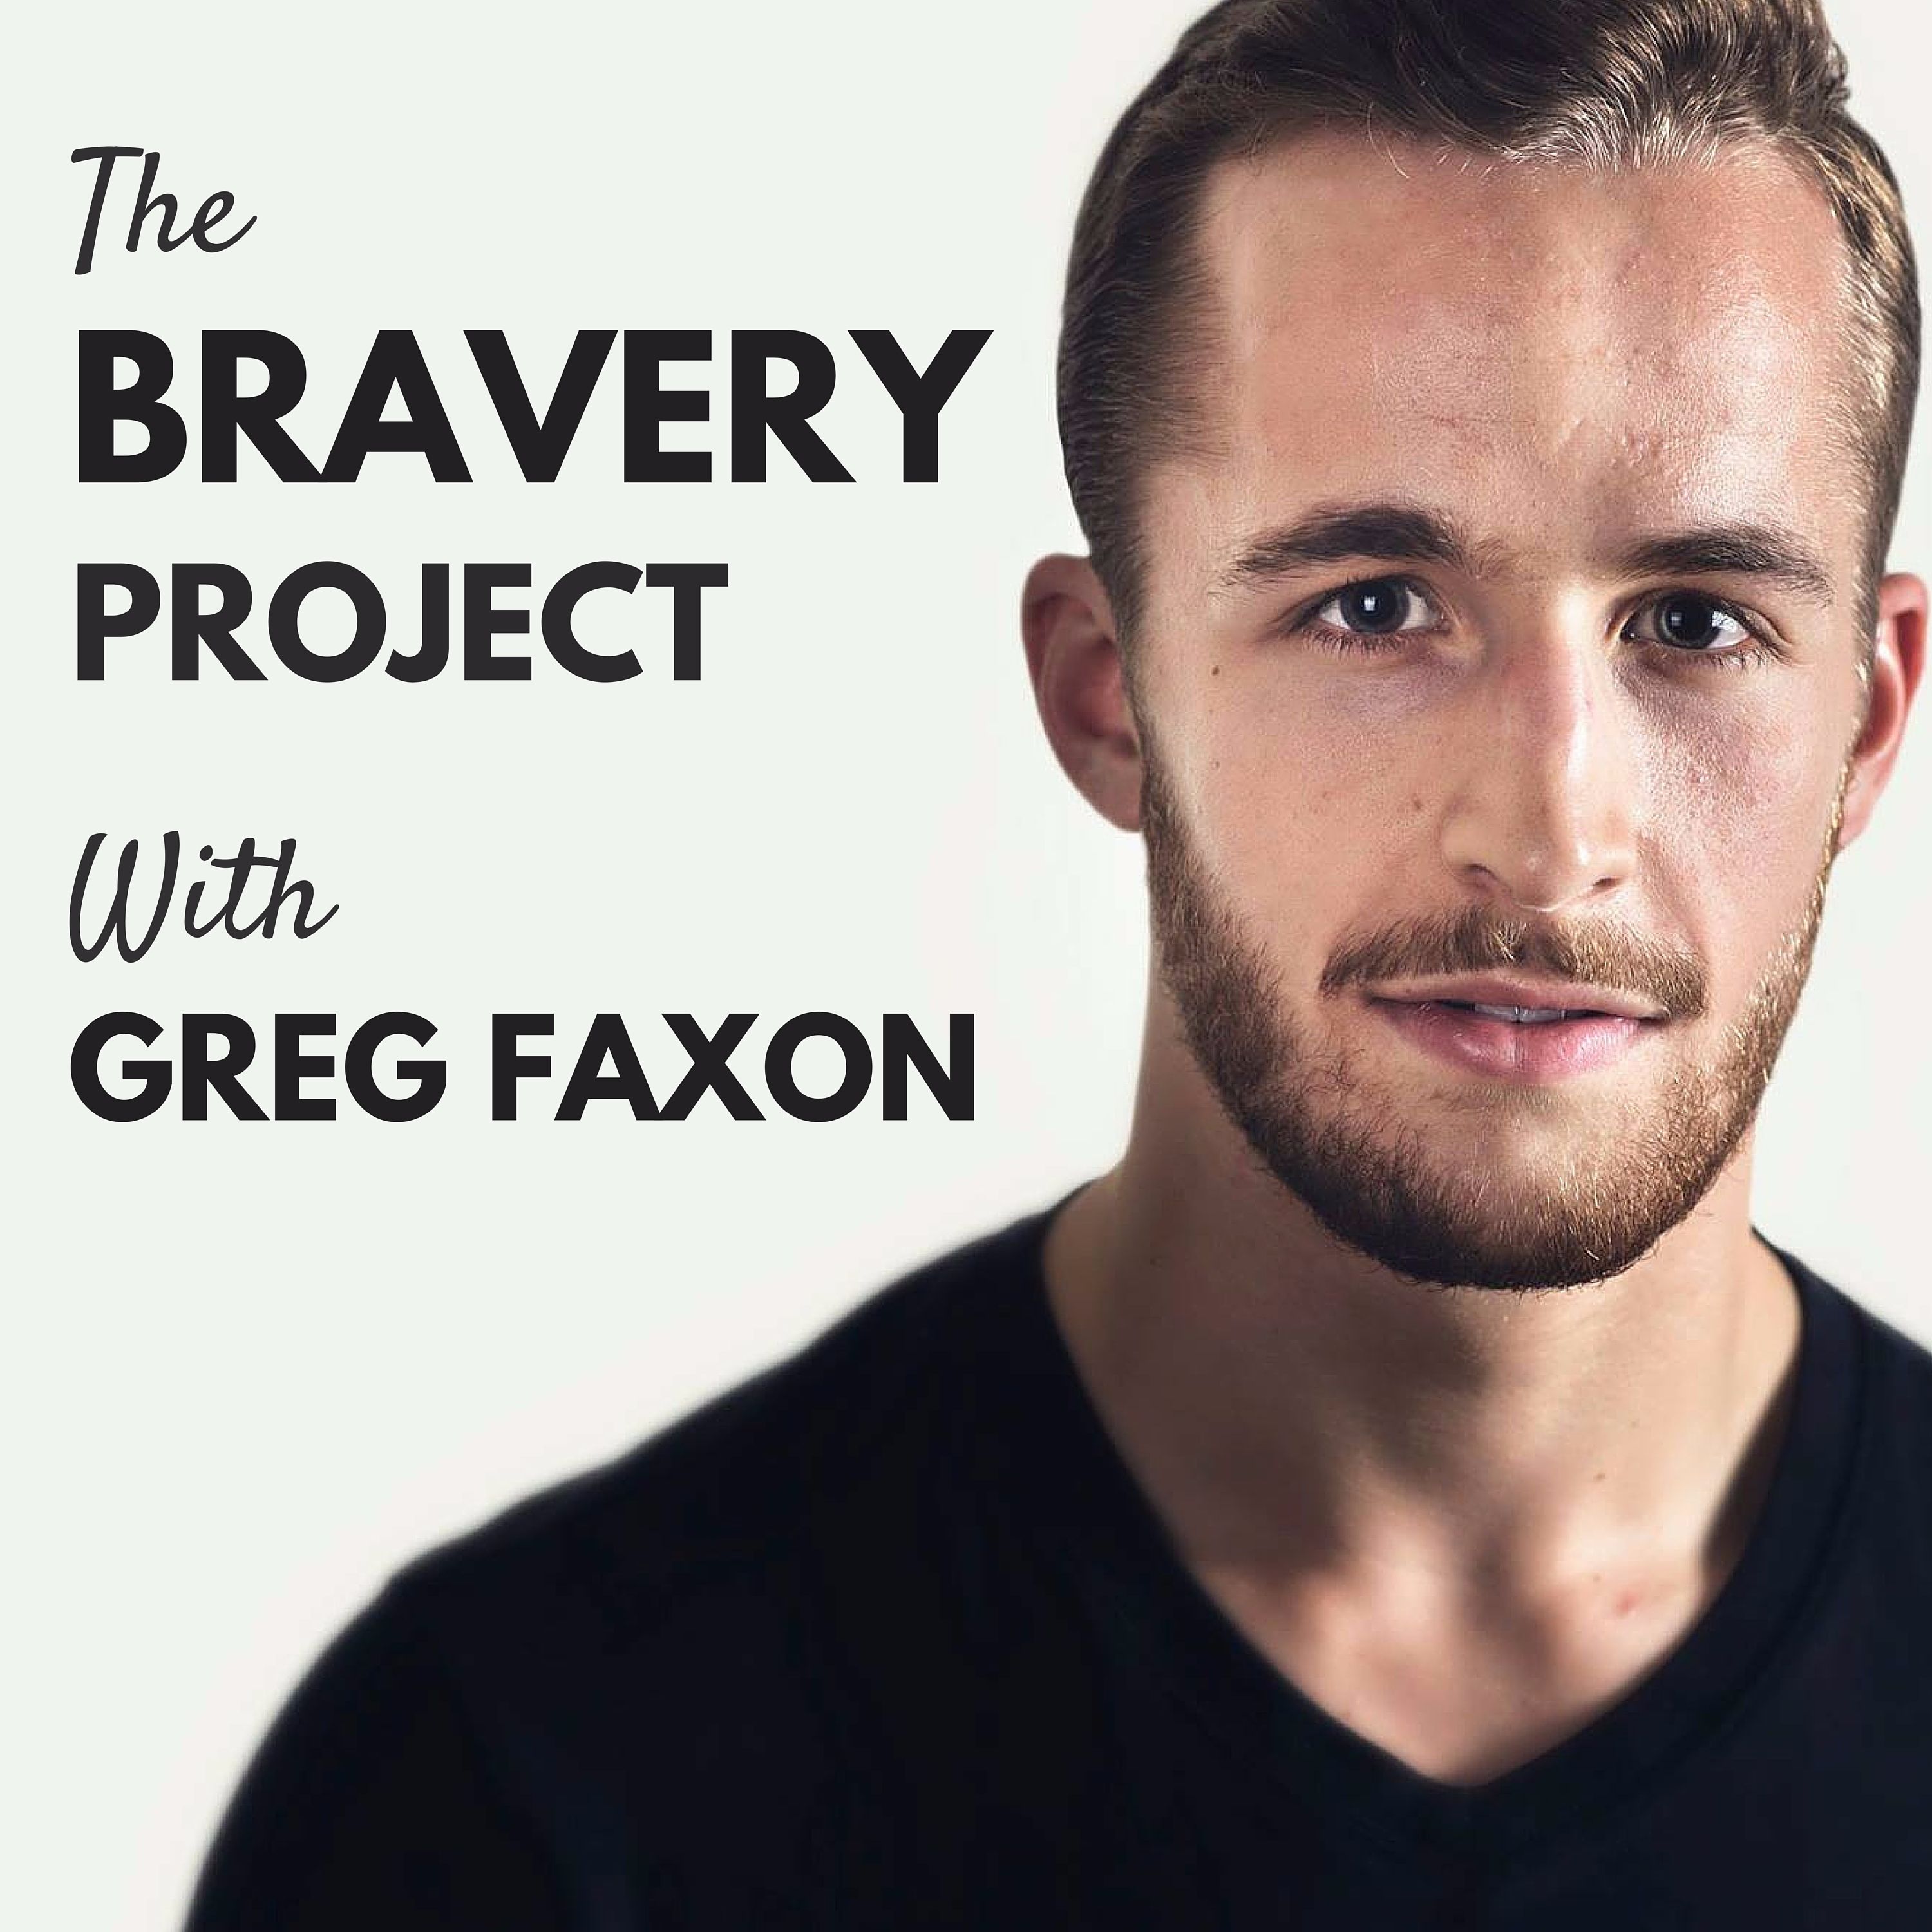 The Bravery Project